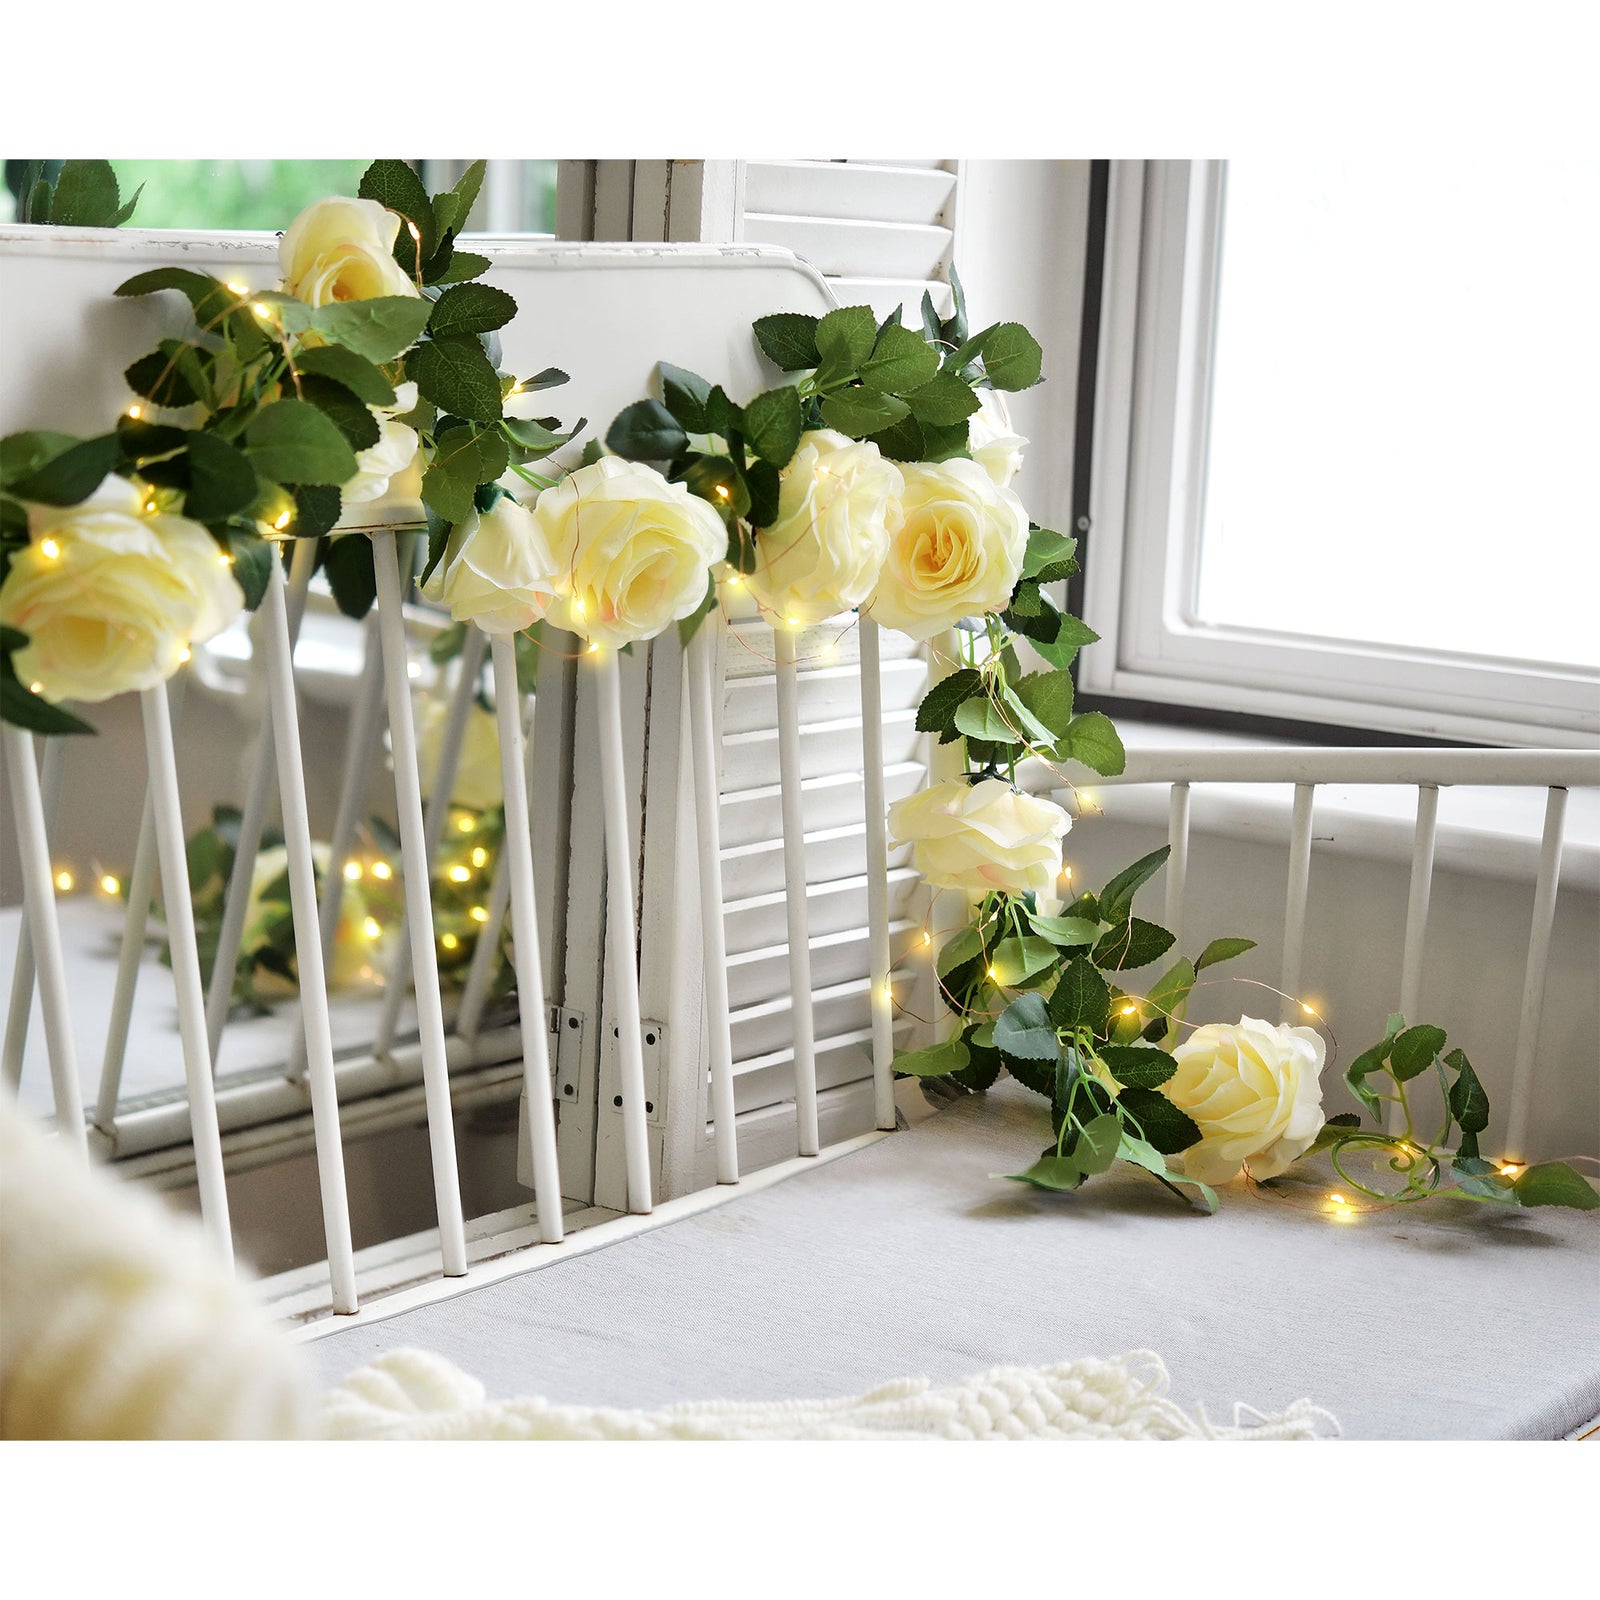 14 Ft 2 Pack Cream White Rose Silk Flower Garland Artificial Flowers Decoration Hanging Floral with 33 feet String Lights